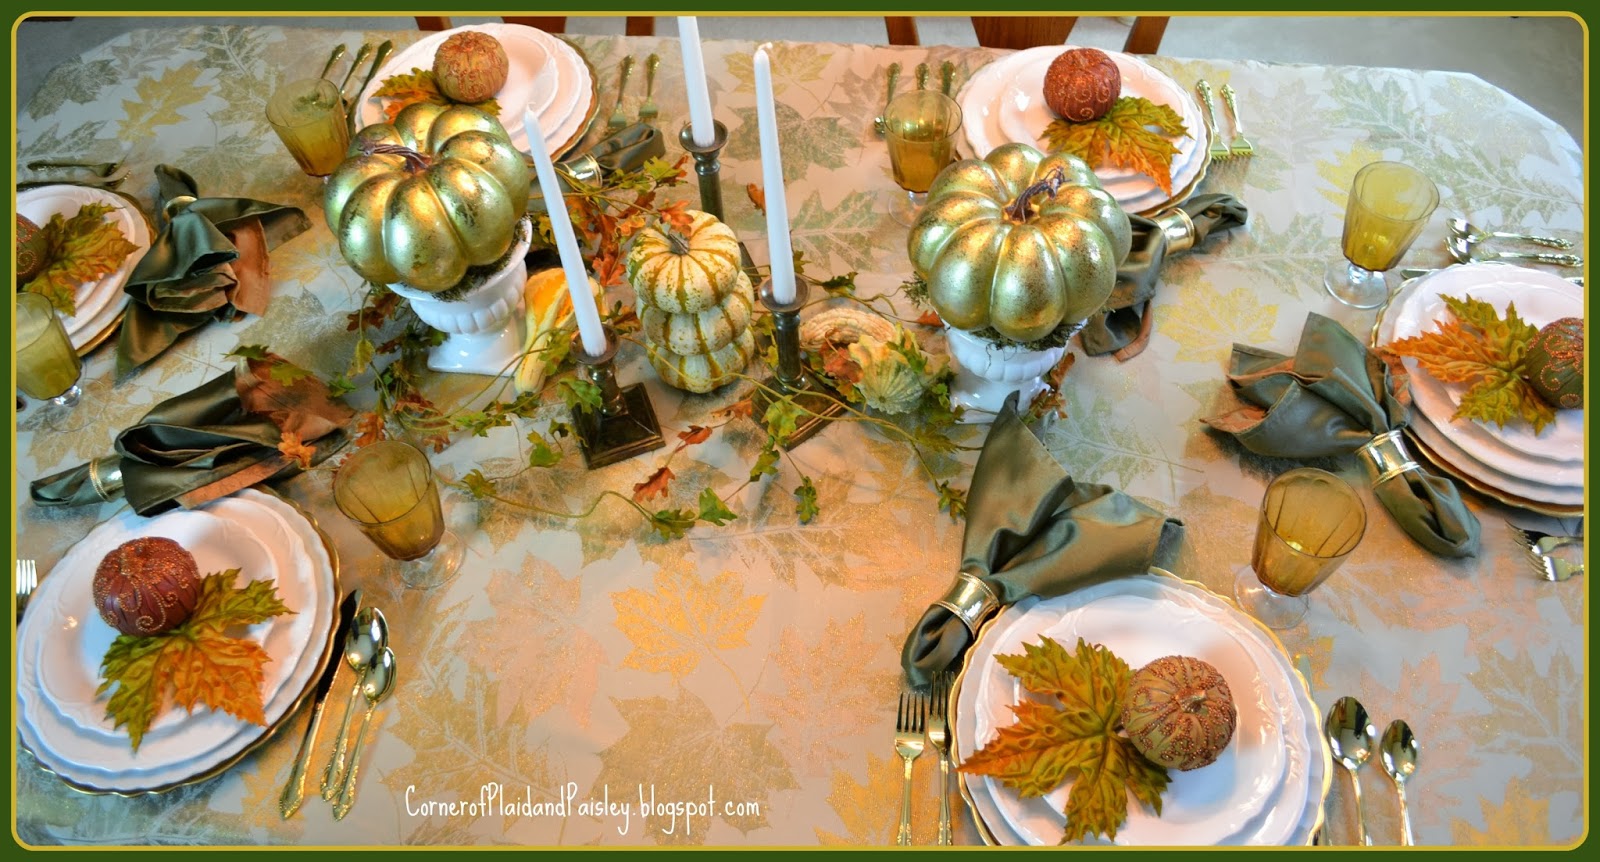 Corner of Plaid and Paisley: White and Gold Fall Tablescape